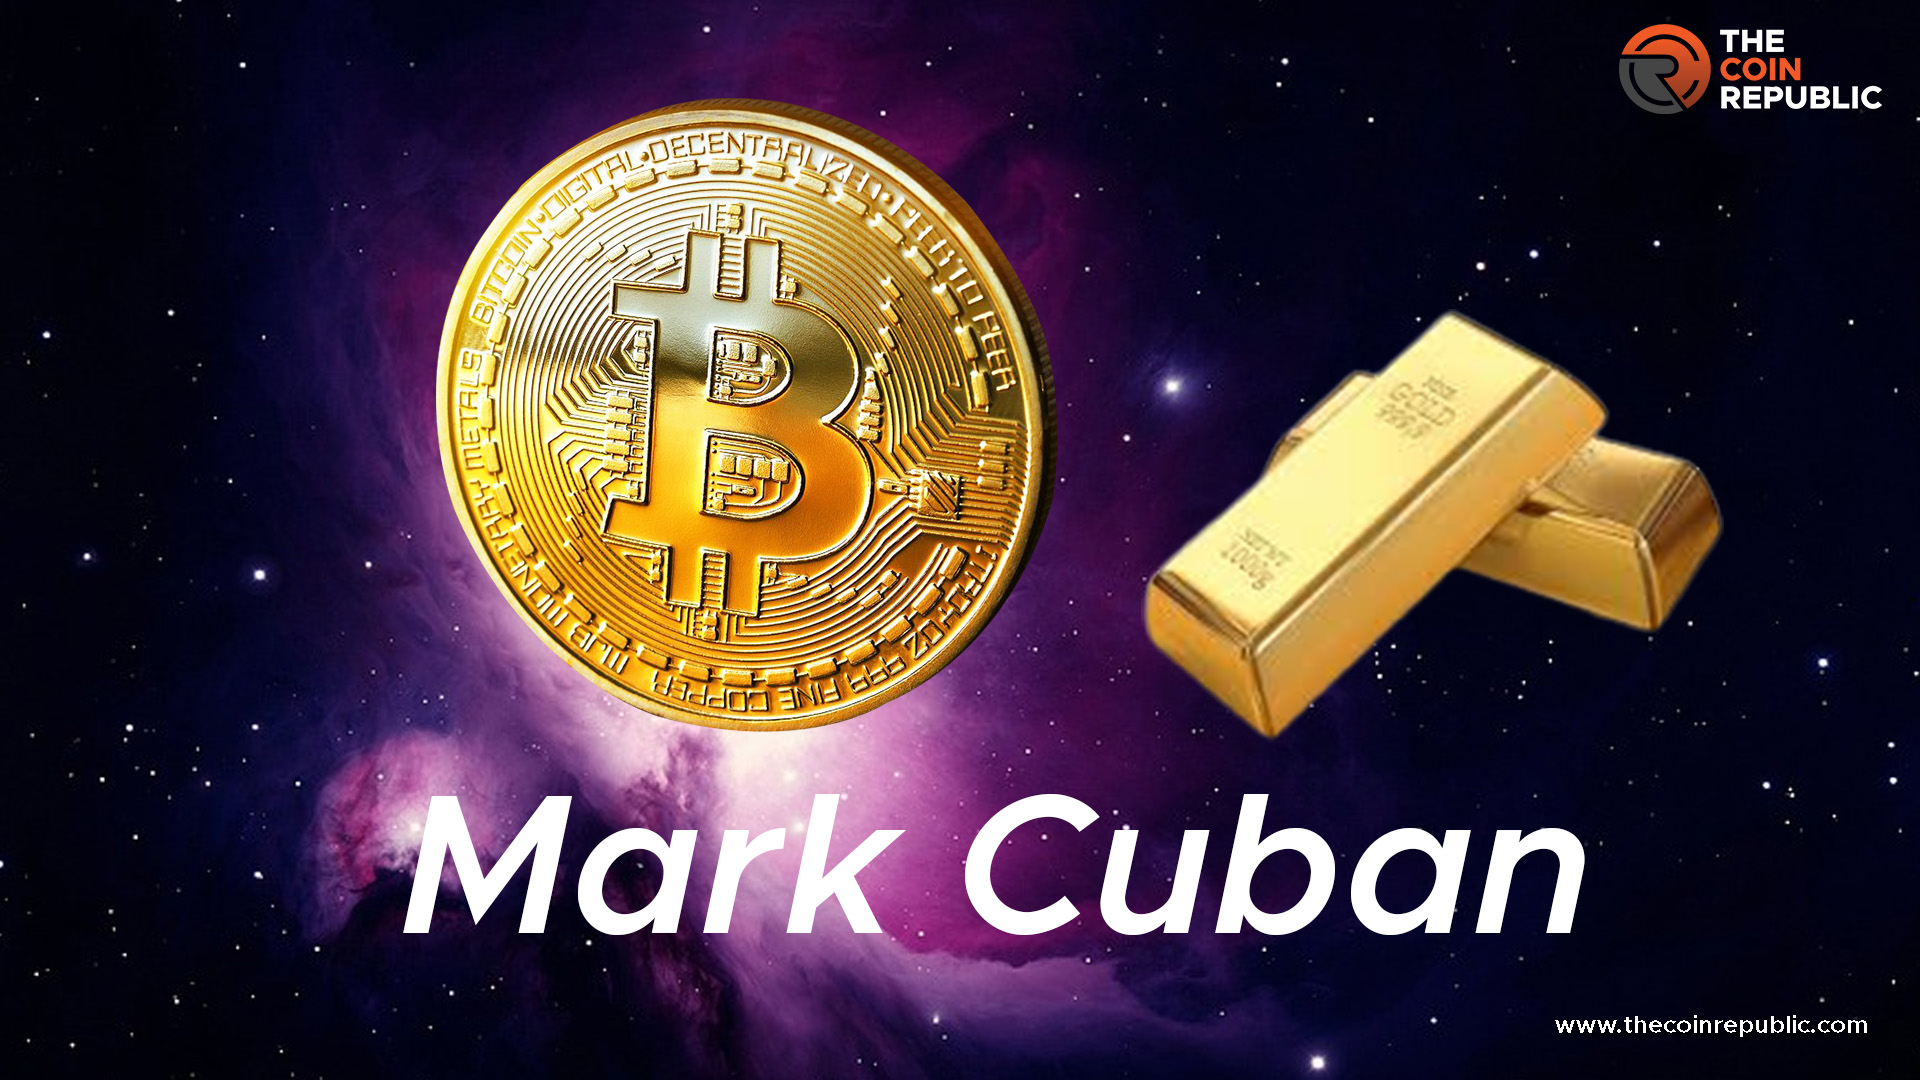 Bitcoin Prices Should Fall More So That I Can Buy More, says Mark Cuban  